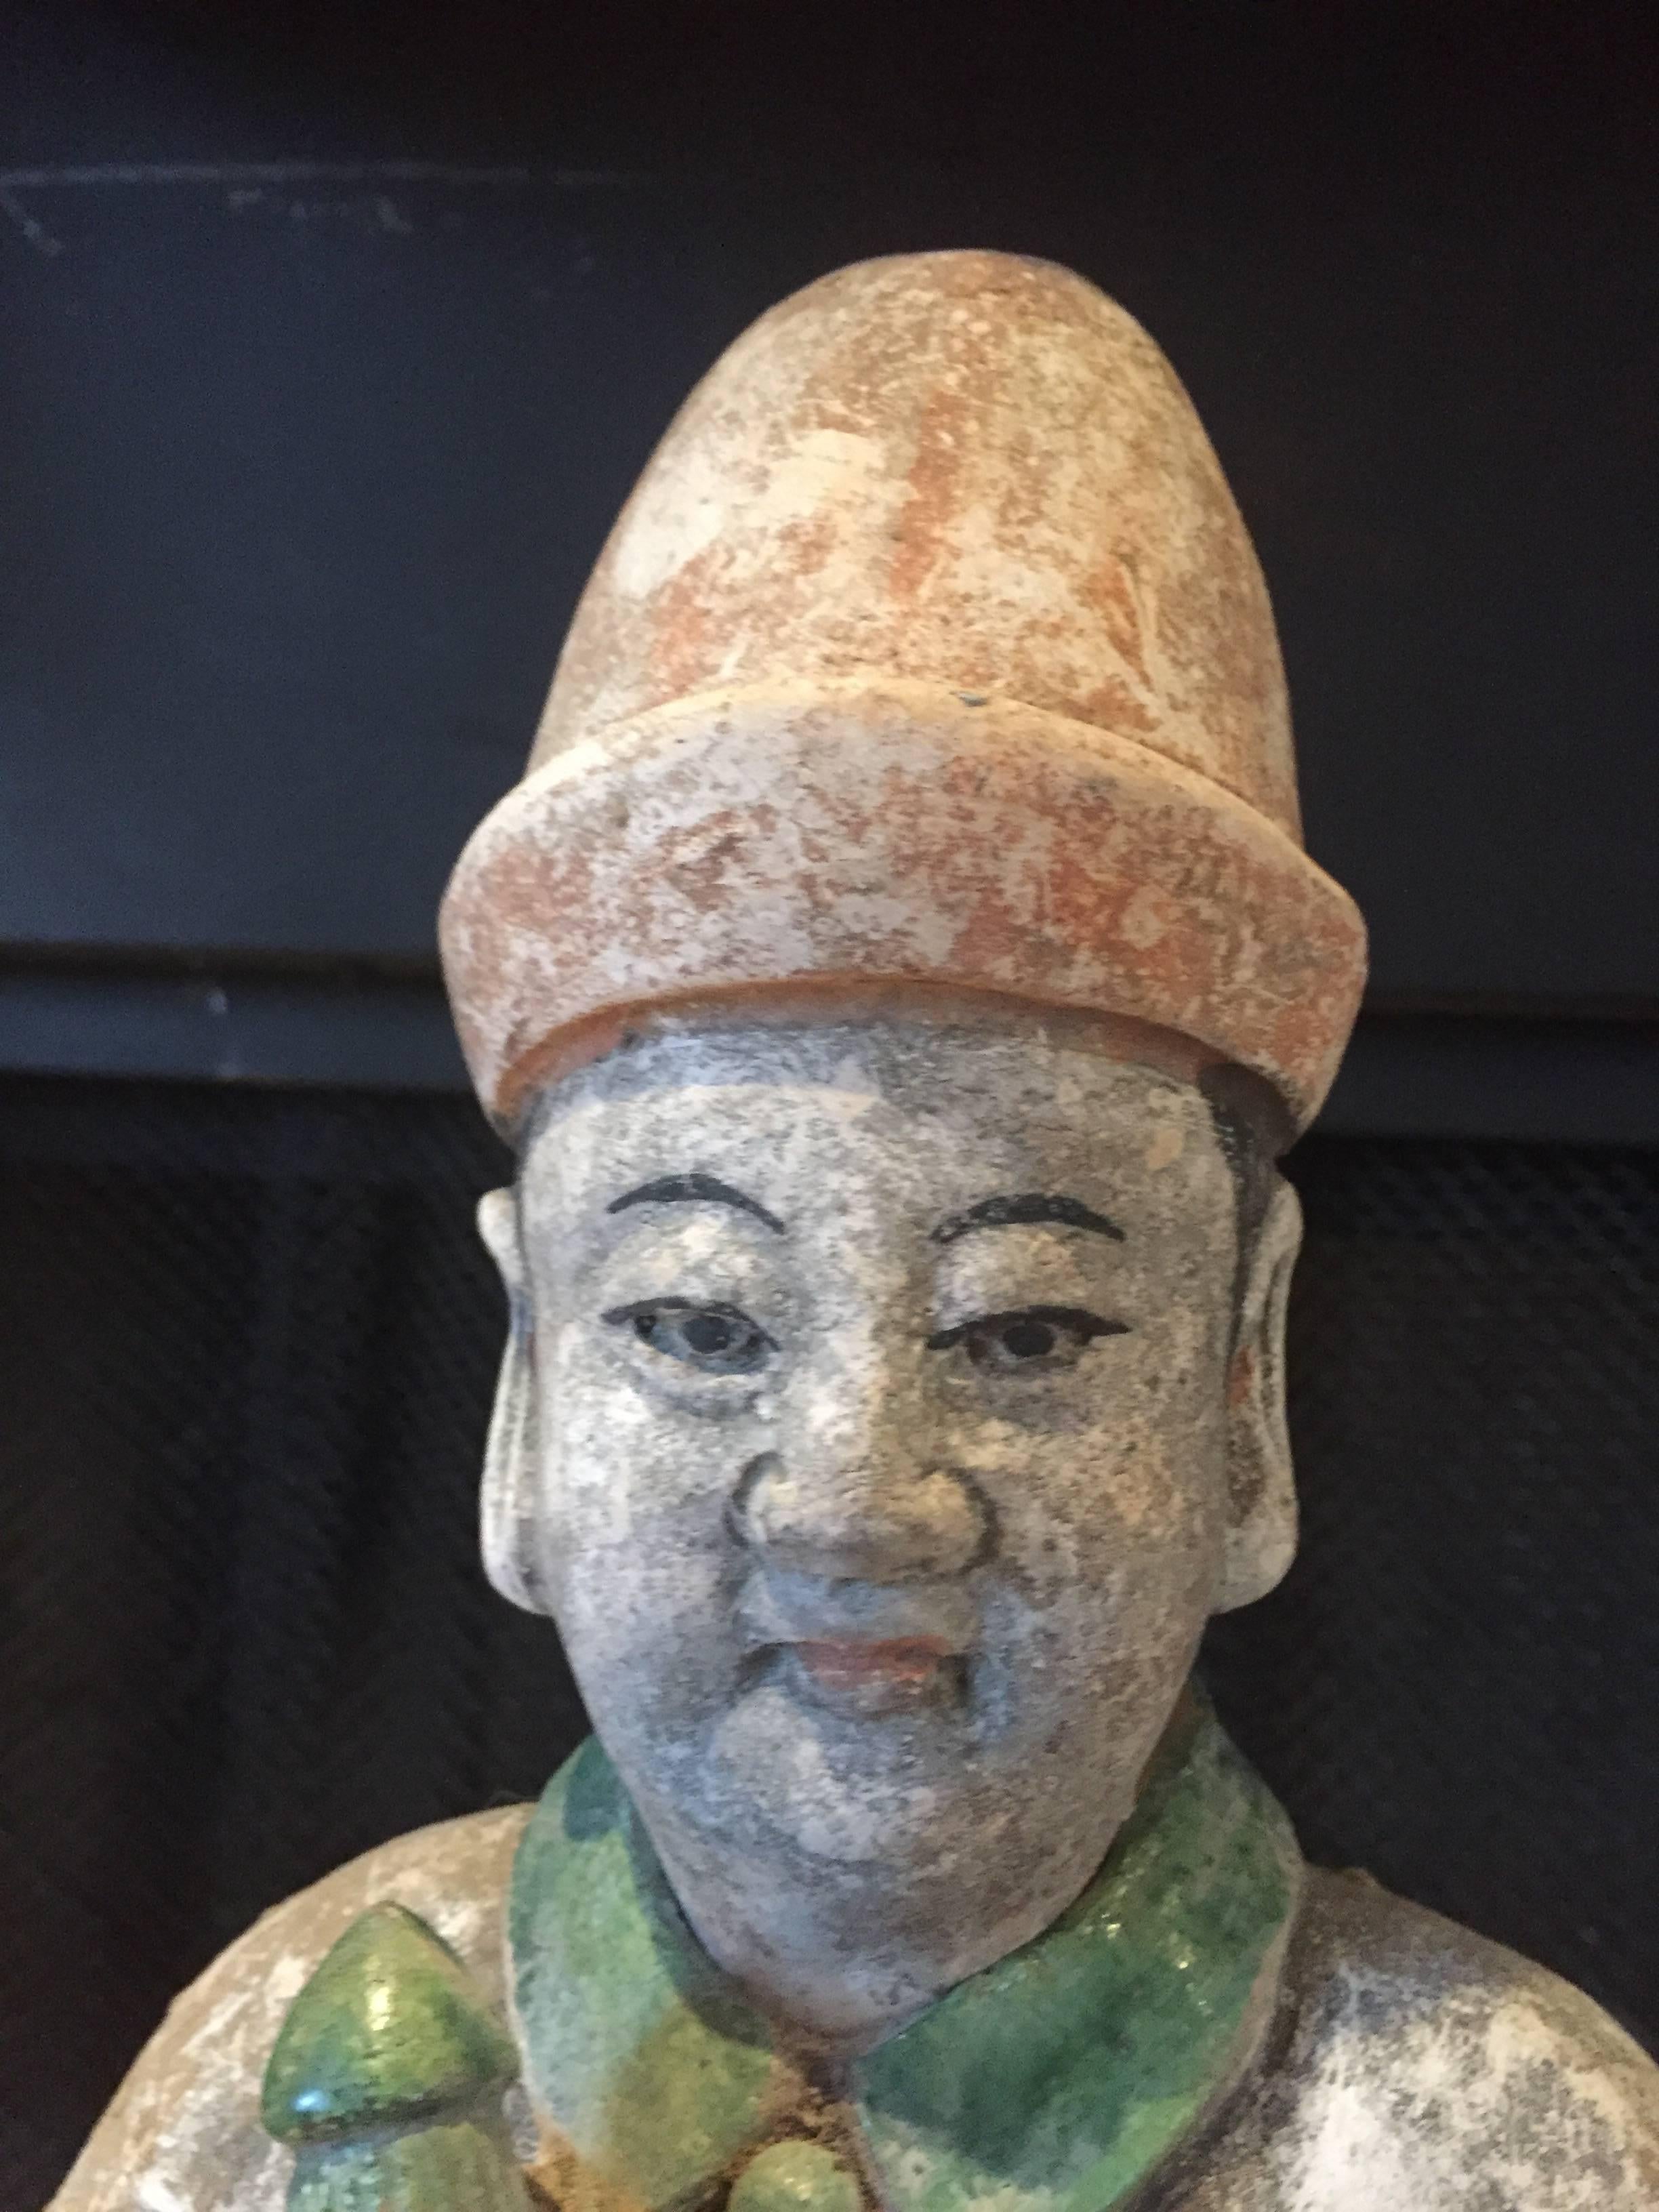 Chinese Important Monumental Ancient China Ming Tomb Treasure Sculpture, 1368-1644